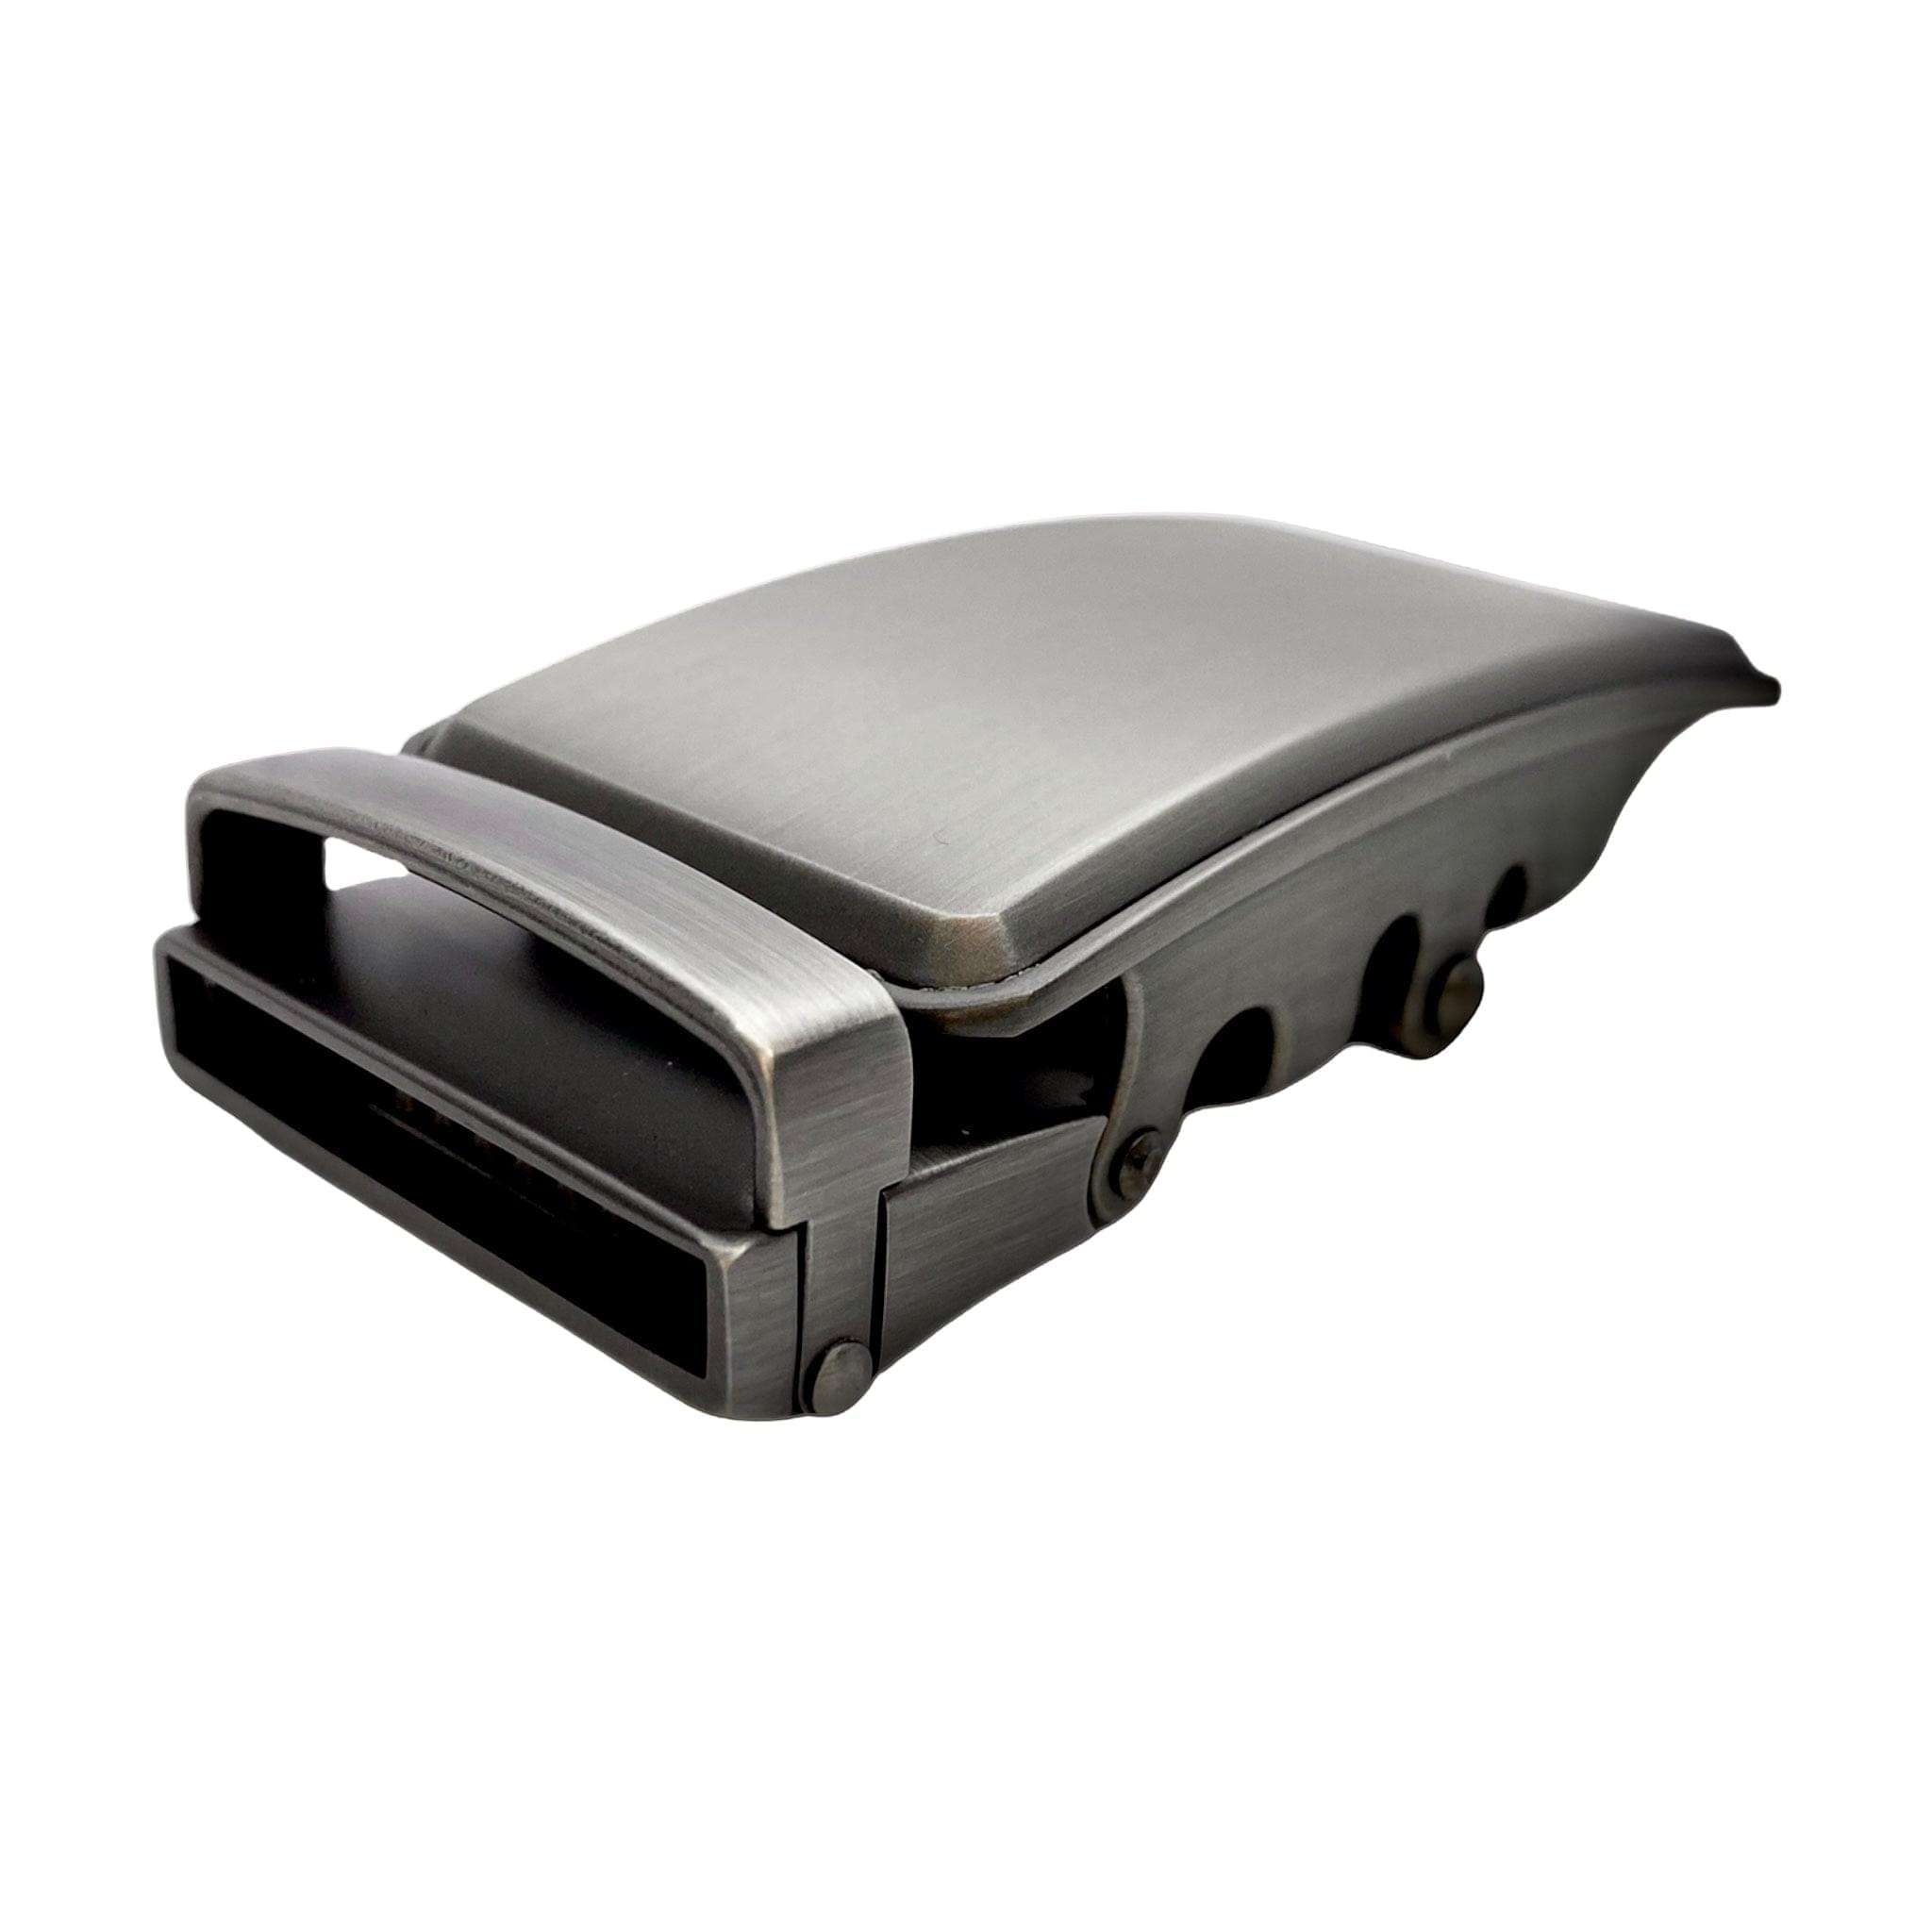 1.38" Automatic Buckle Silver